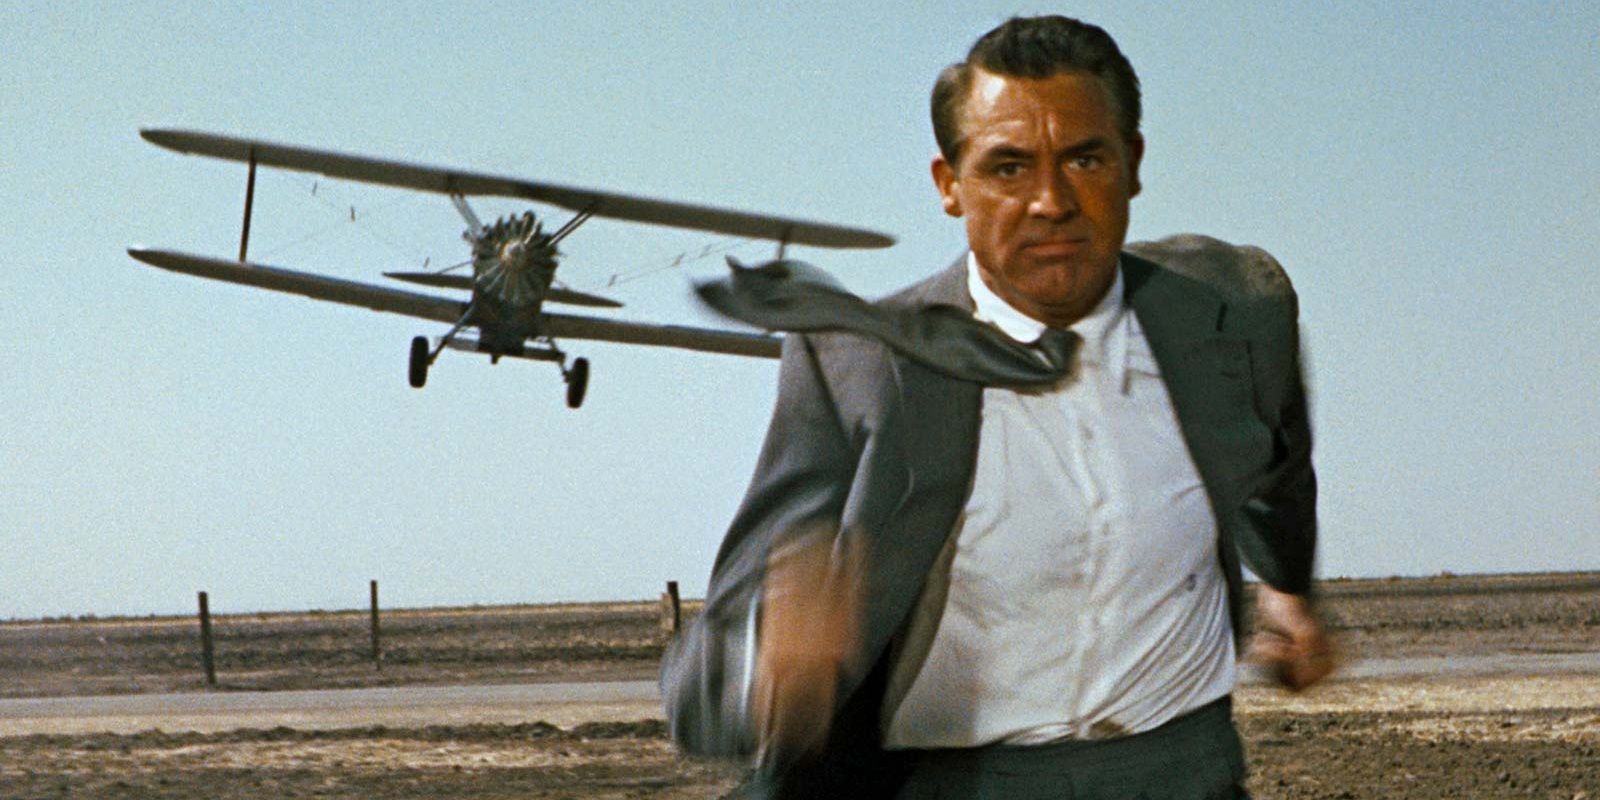 Cary Grant in North by Northwest running from a crop duster